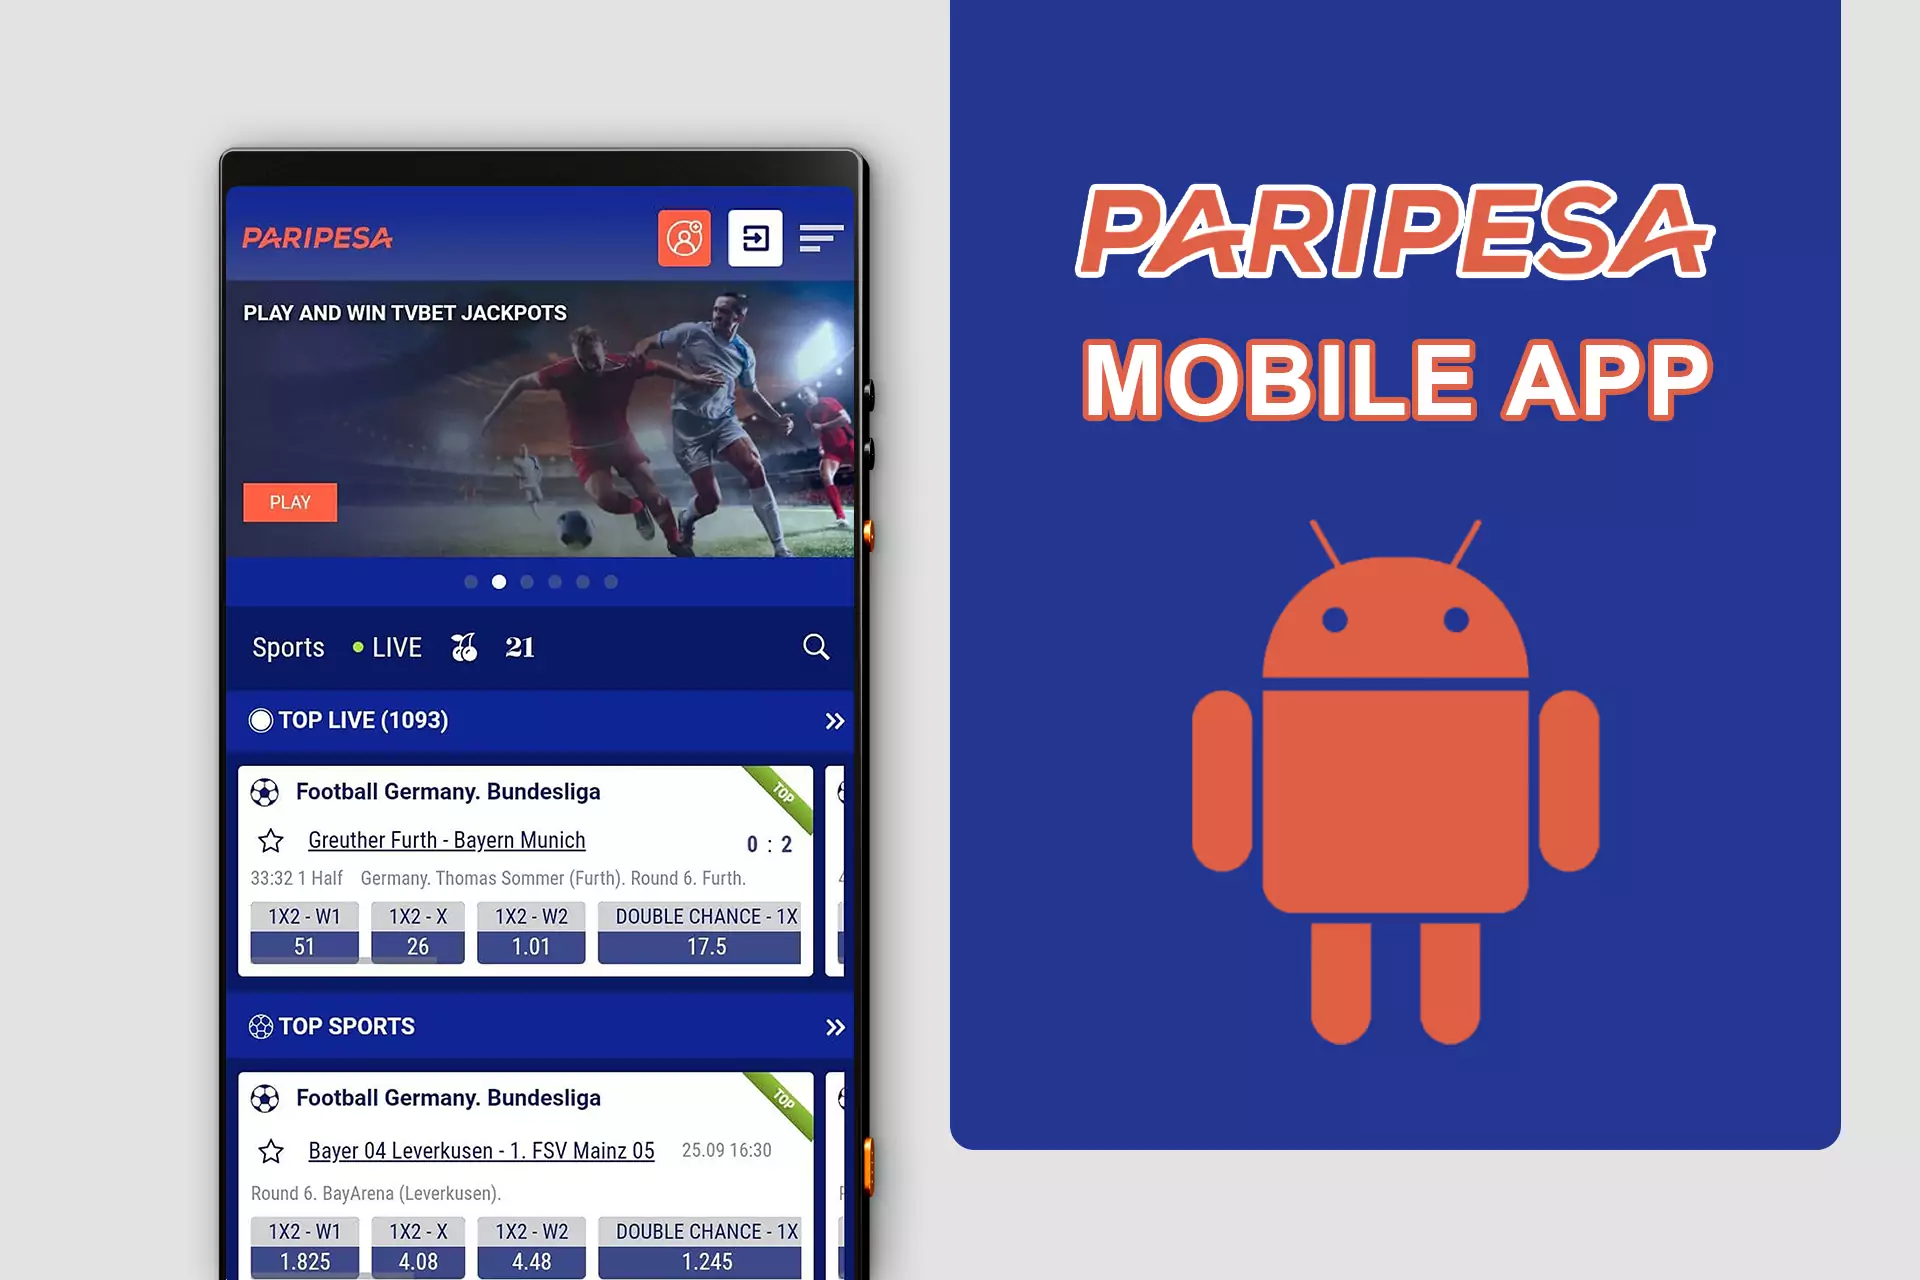 For your convenience, you can download the Android app of PariPesa.